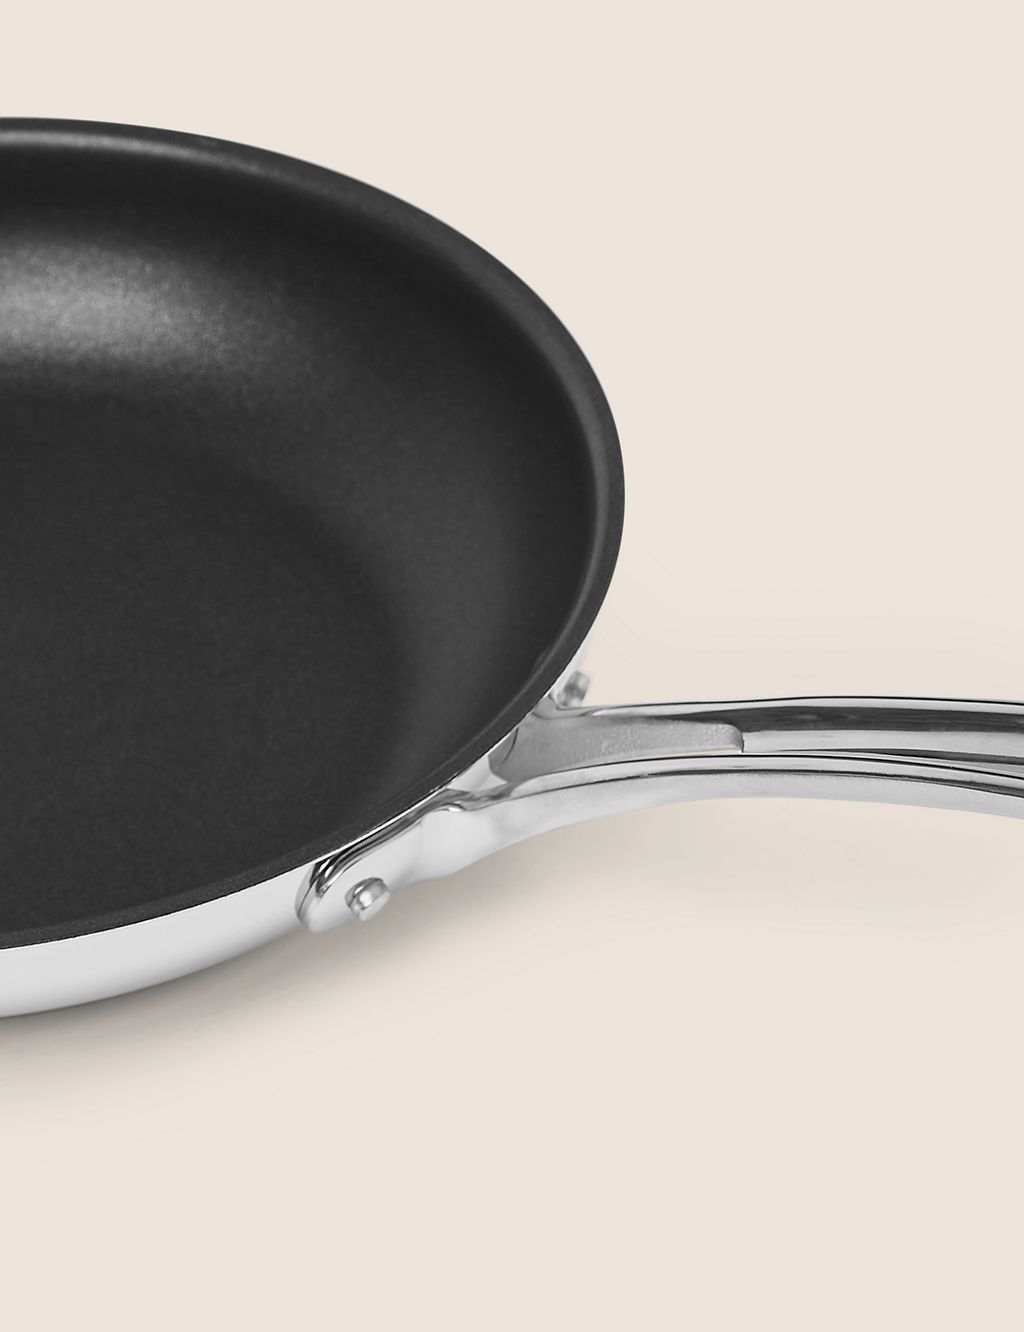 Stainless Steel 20cm Small Non-Stick Frying Pan 2 of 5